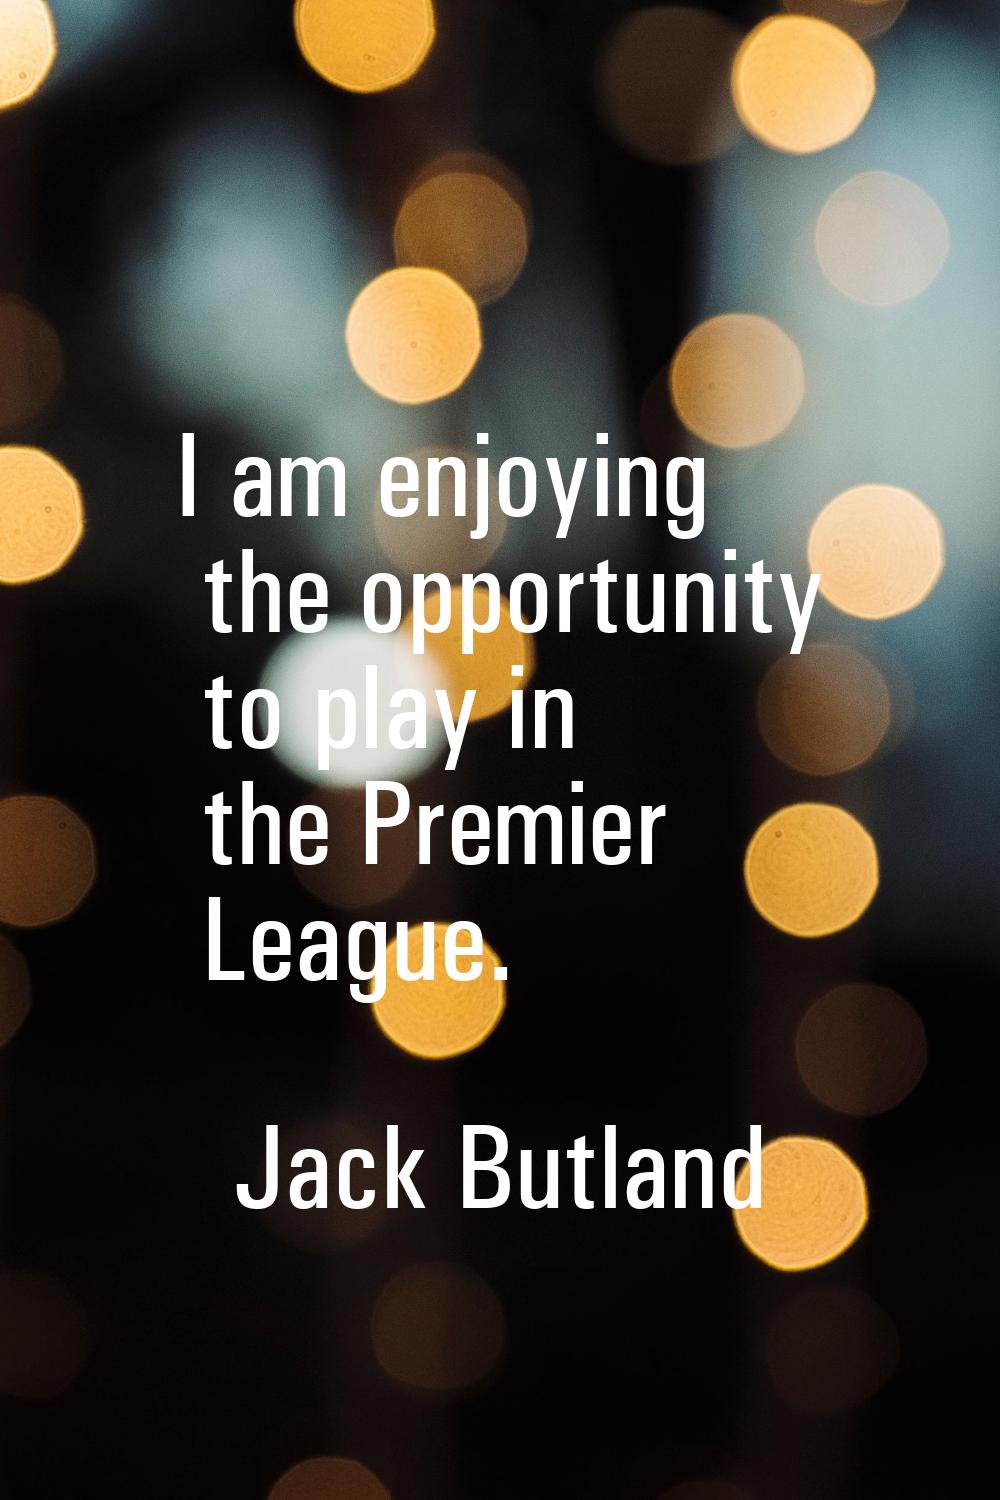 I am enjoying the opportunity to play in the Premier League.